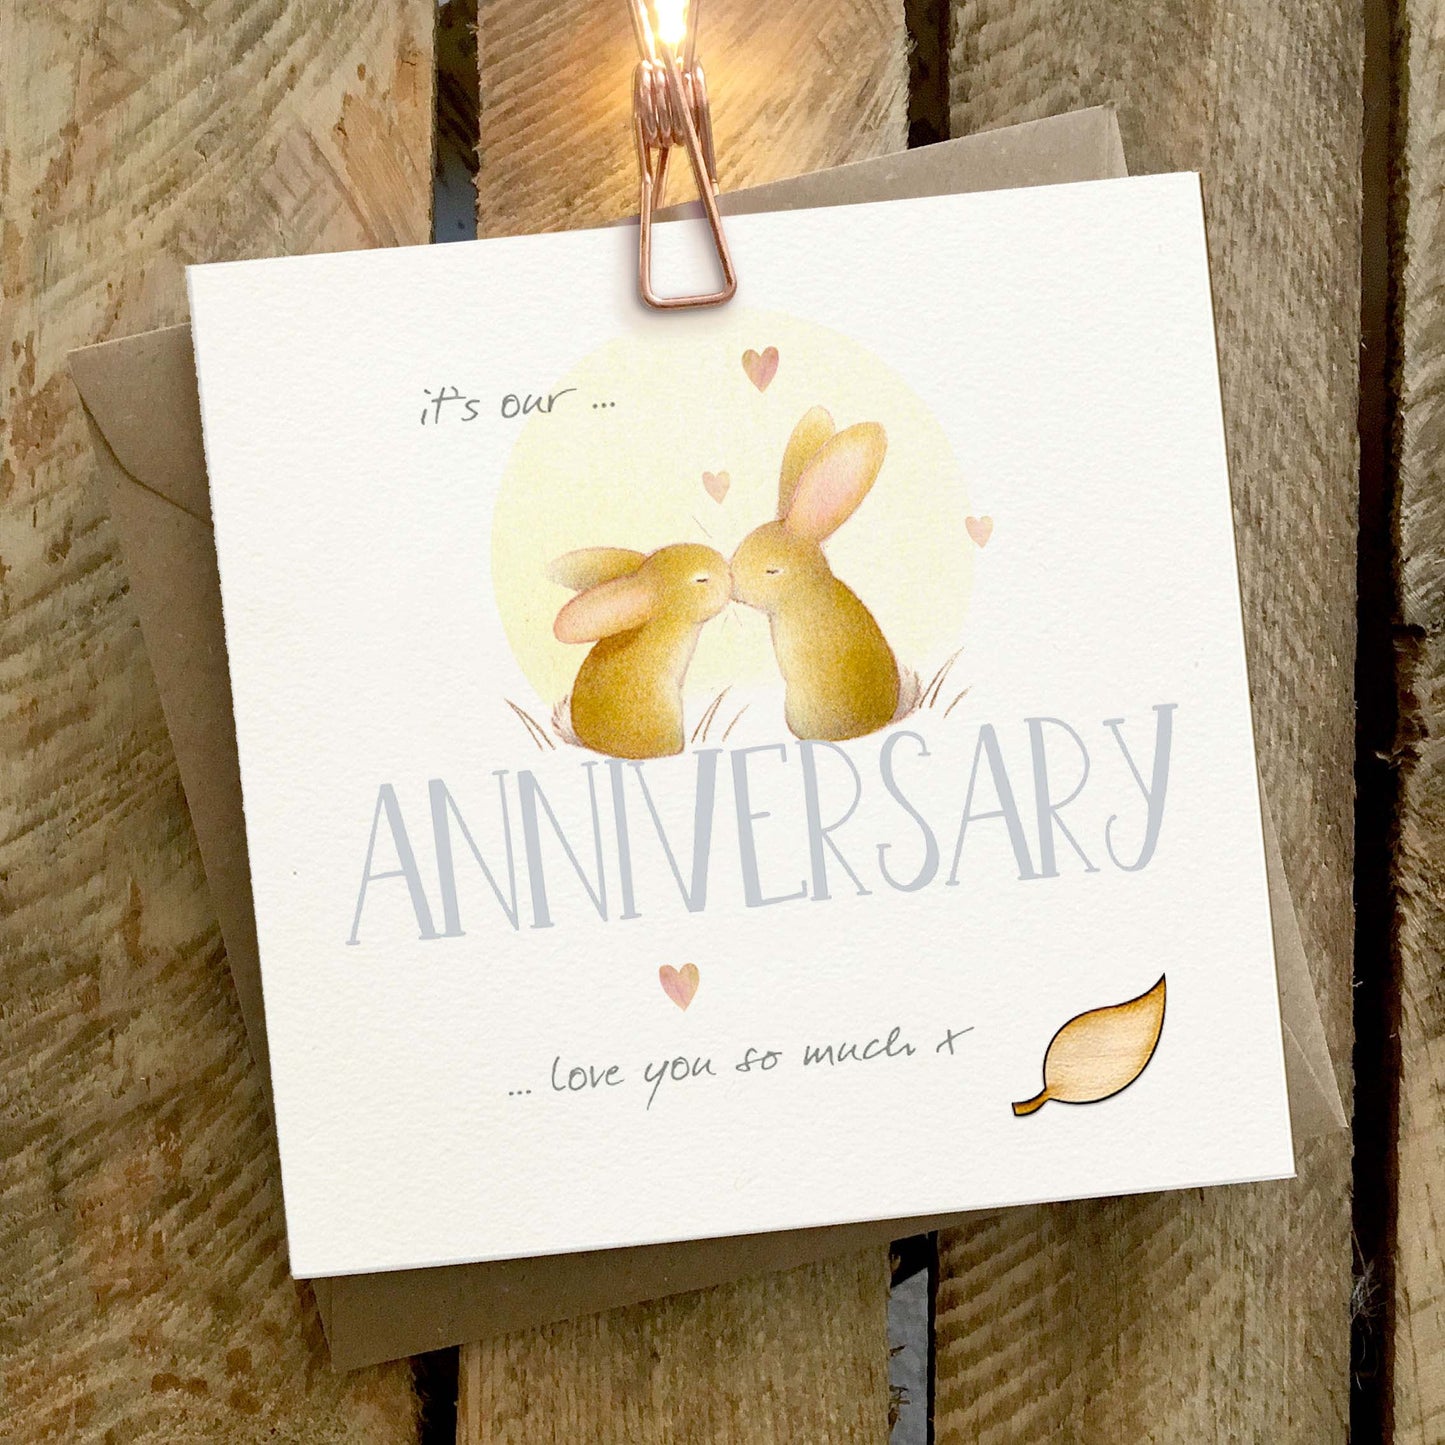 Our Anniversary Greetings Card